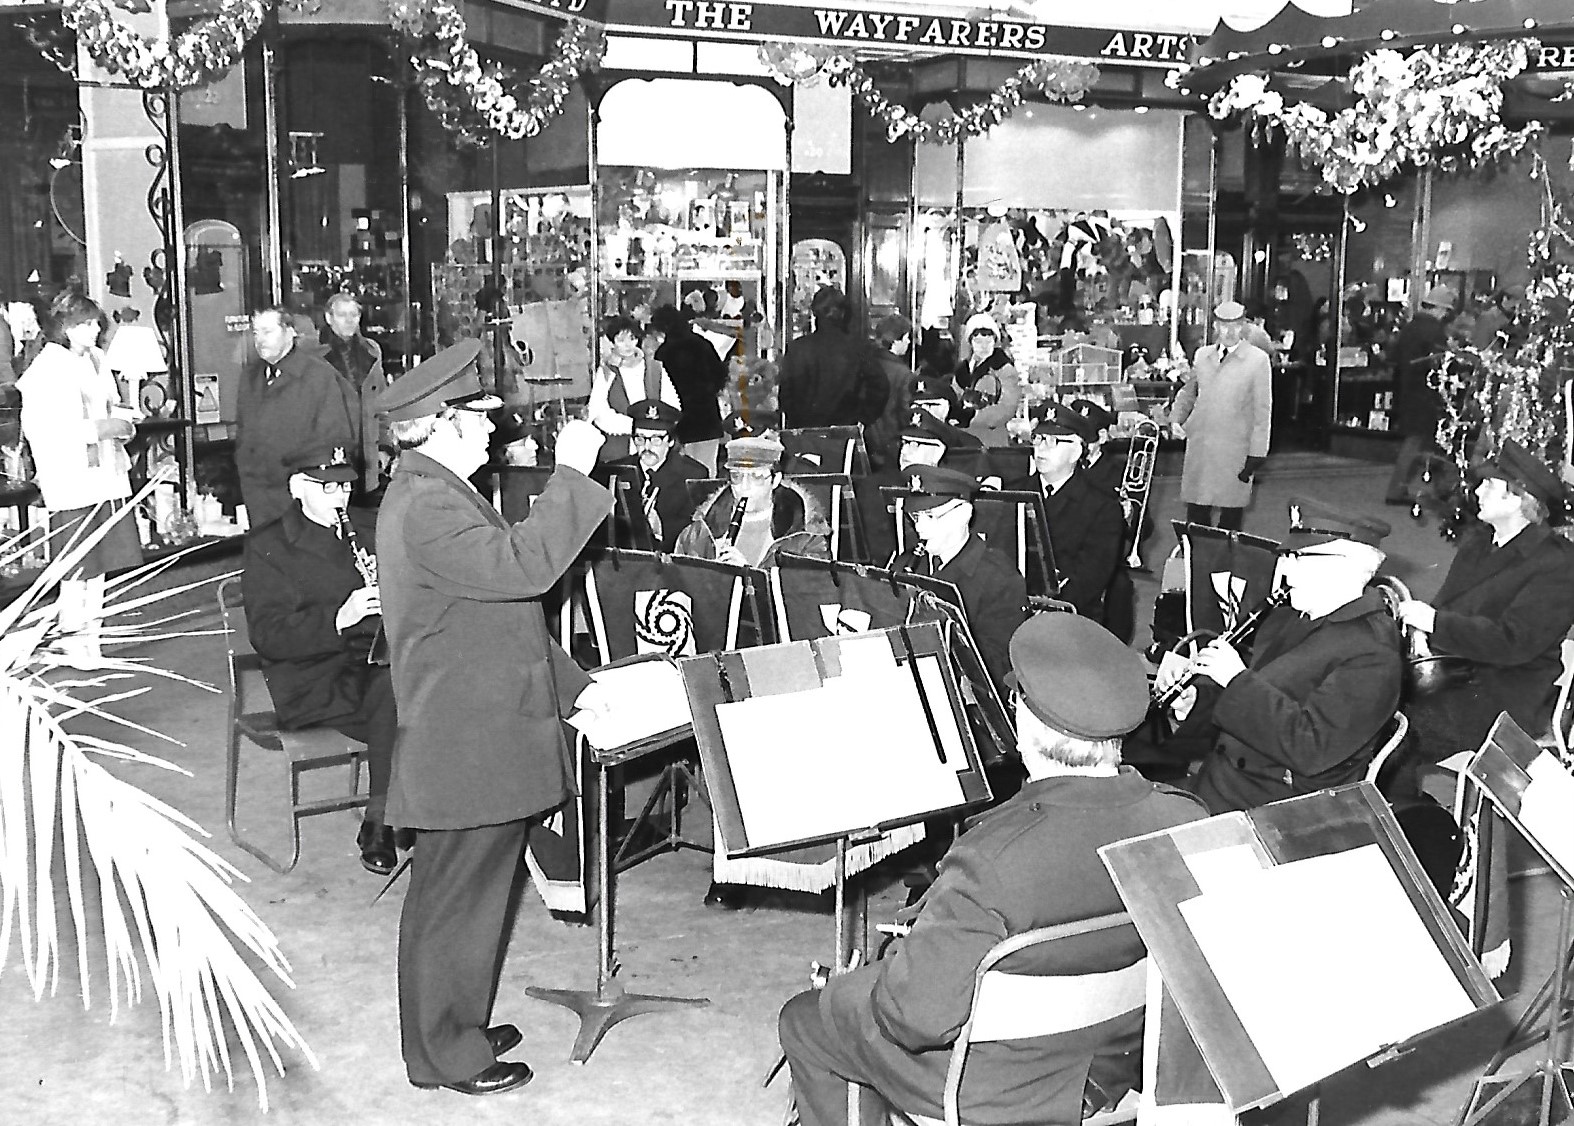 Shoppers at Wayfarers Shopping Arcade in Southport were treated to Christmas Carols from a variety of bands plus a visit from the Southport Theatre pantomime cast in December 1982